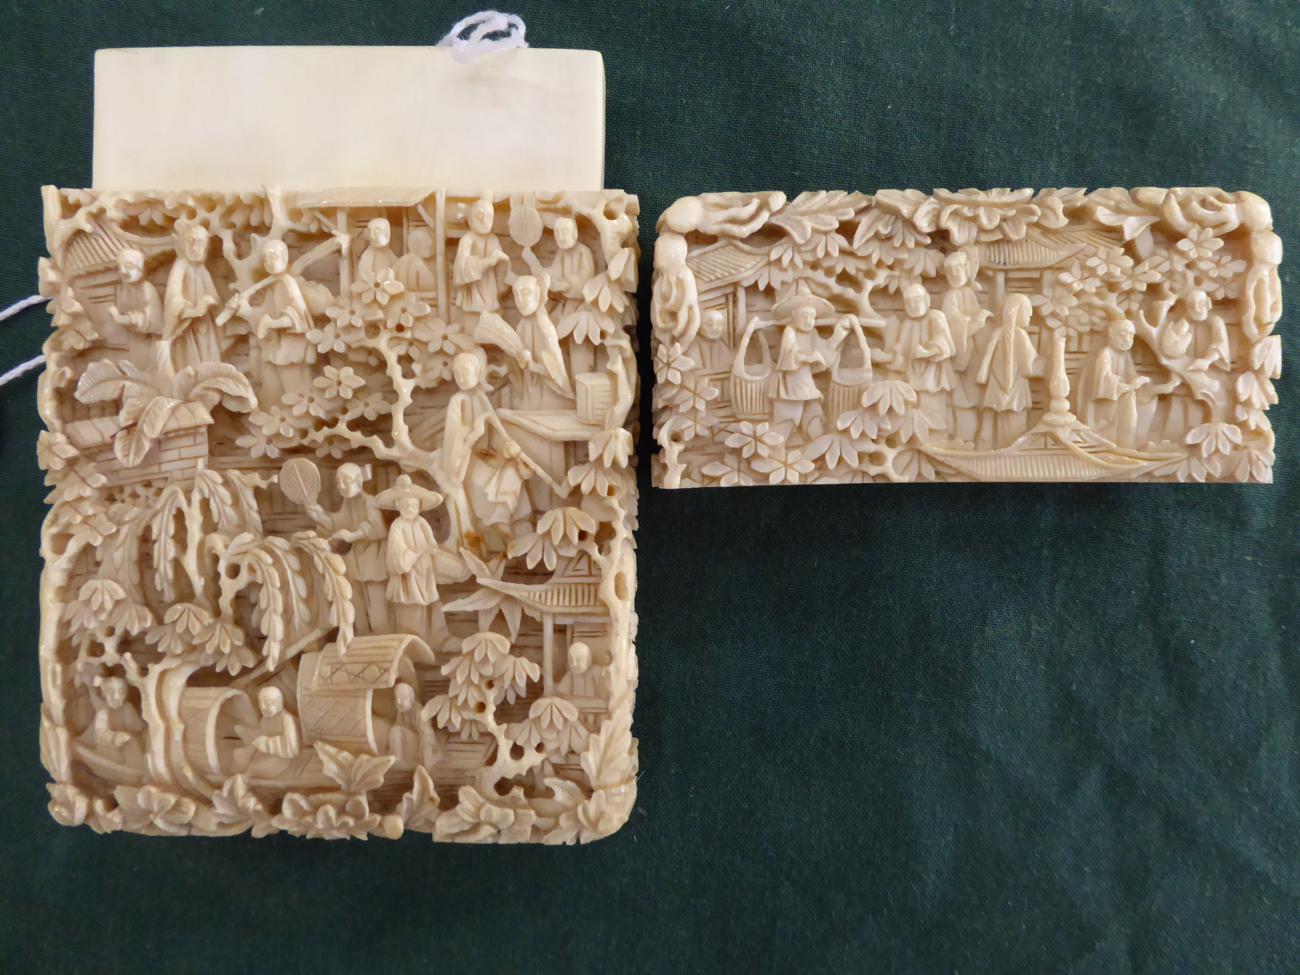 A Cantonese Ivory Card Case, mid 19th century, of rectangular form carved with figures amongst trees - Image 4 of 7